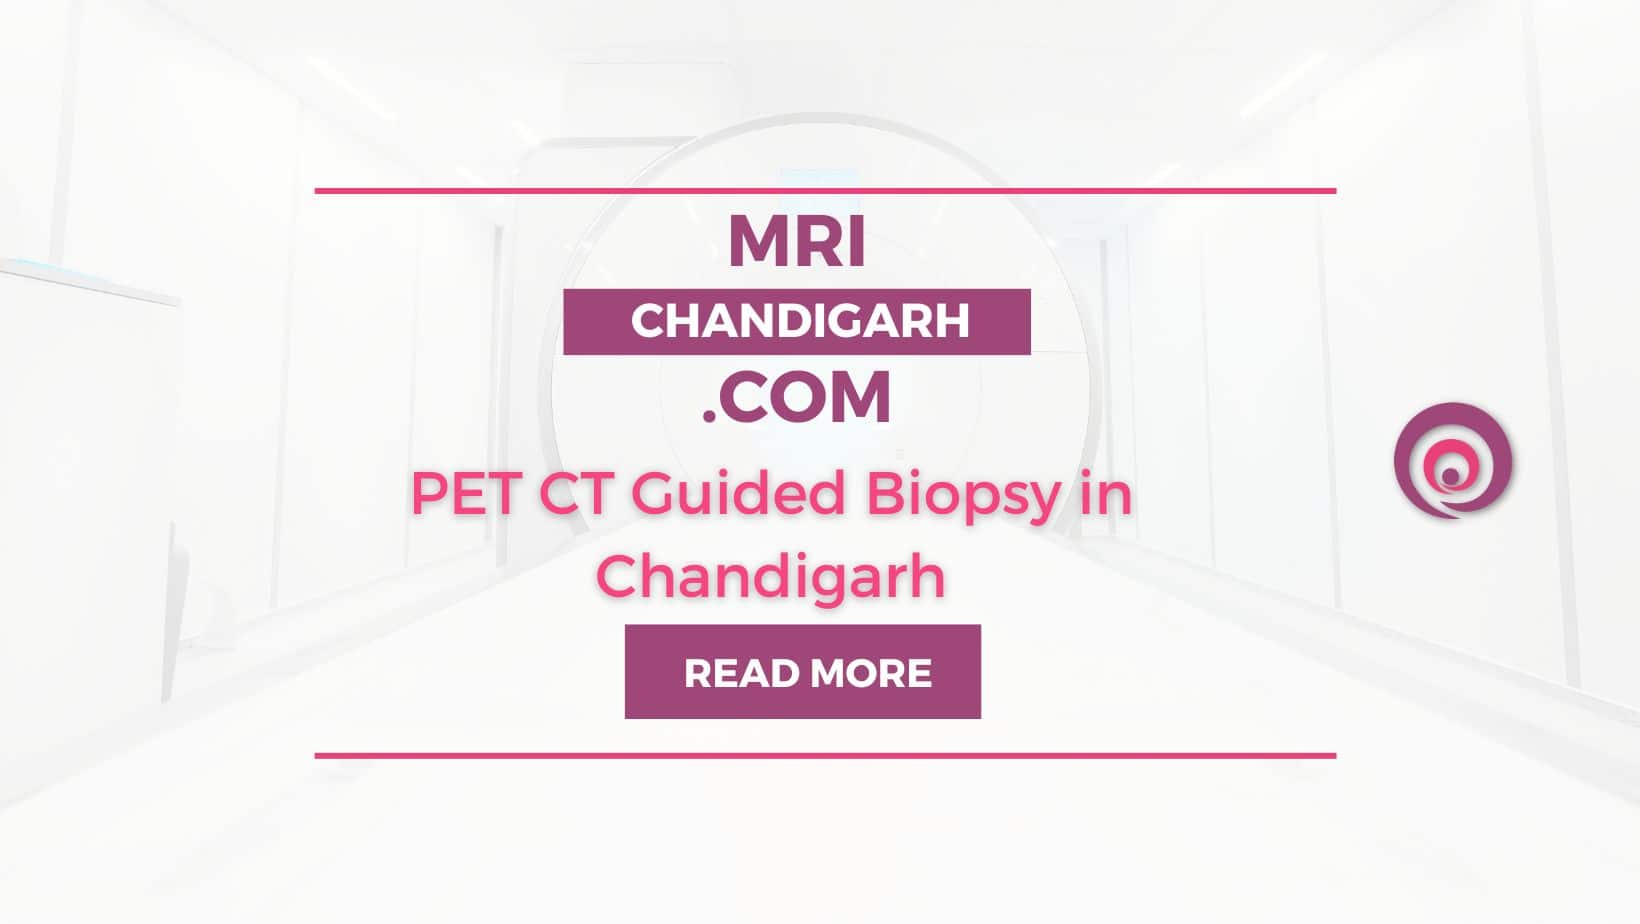 PET CT Guided Biopsy in Chandigarh